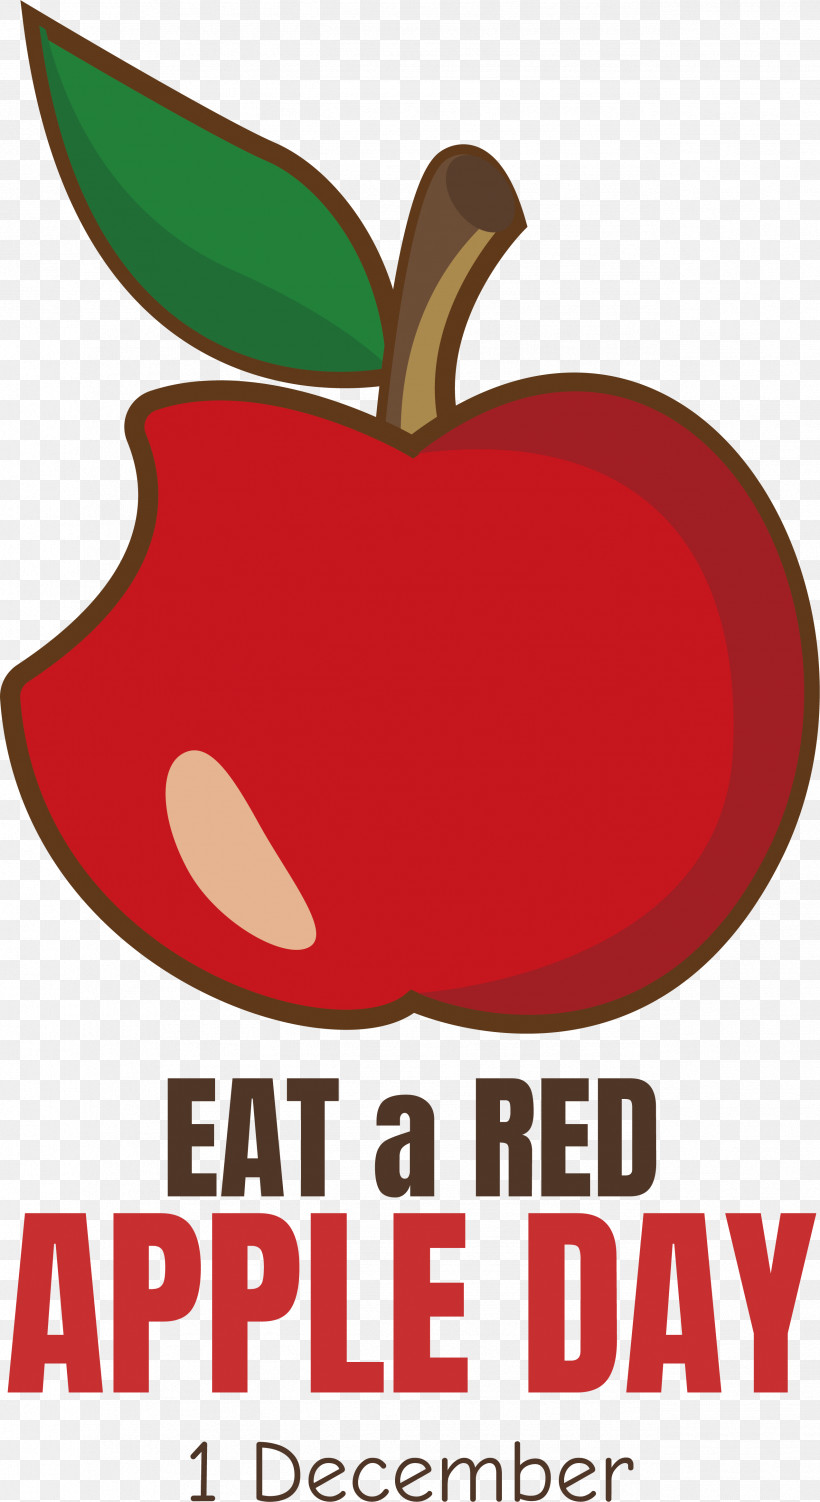 Red Apple Eat A Red Apple Day, PNG, 2547x4666px, Red Apple, Eat A Red Apple Day Download Free